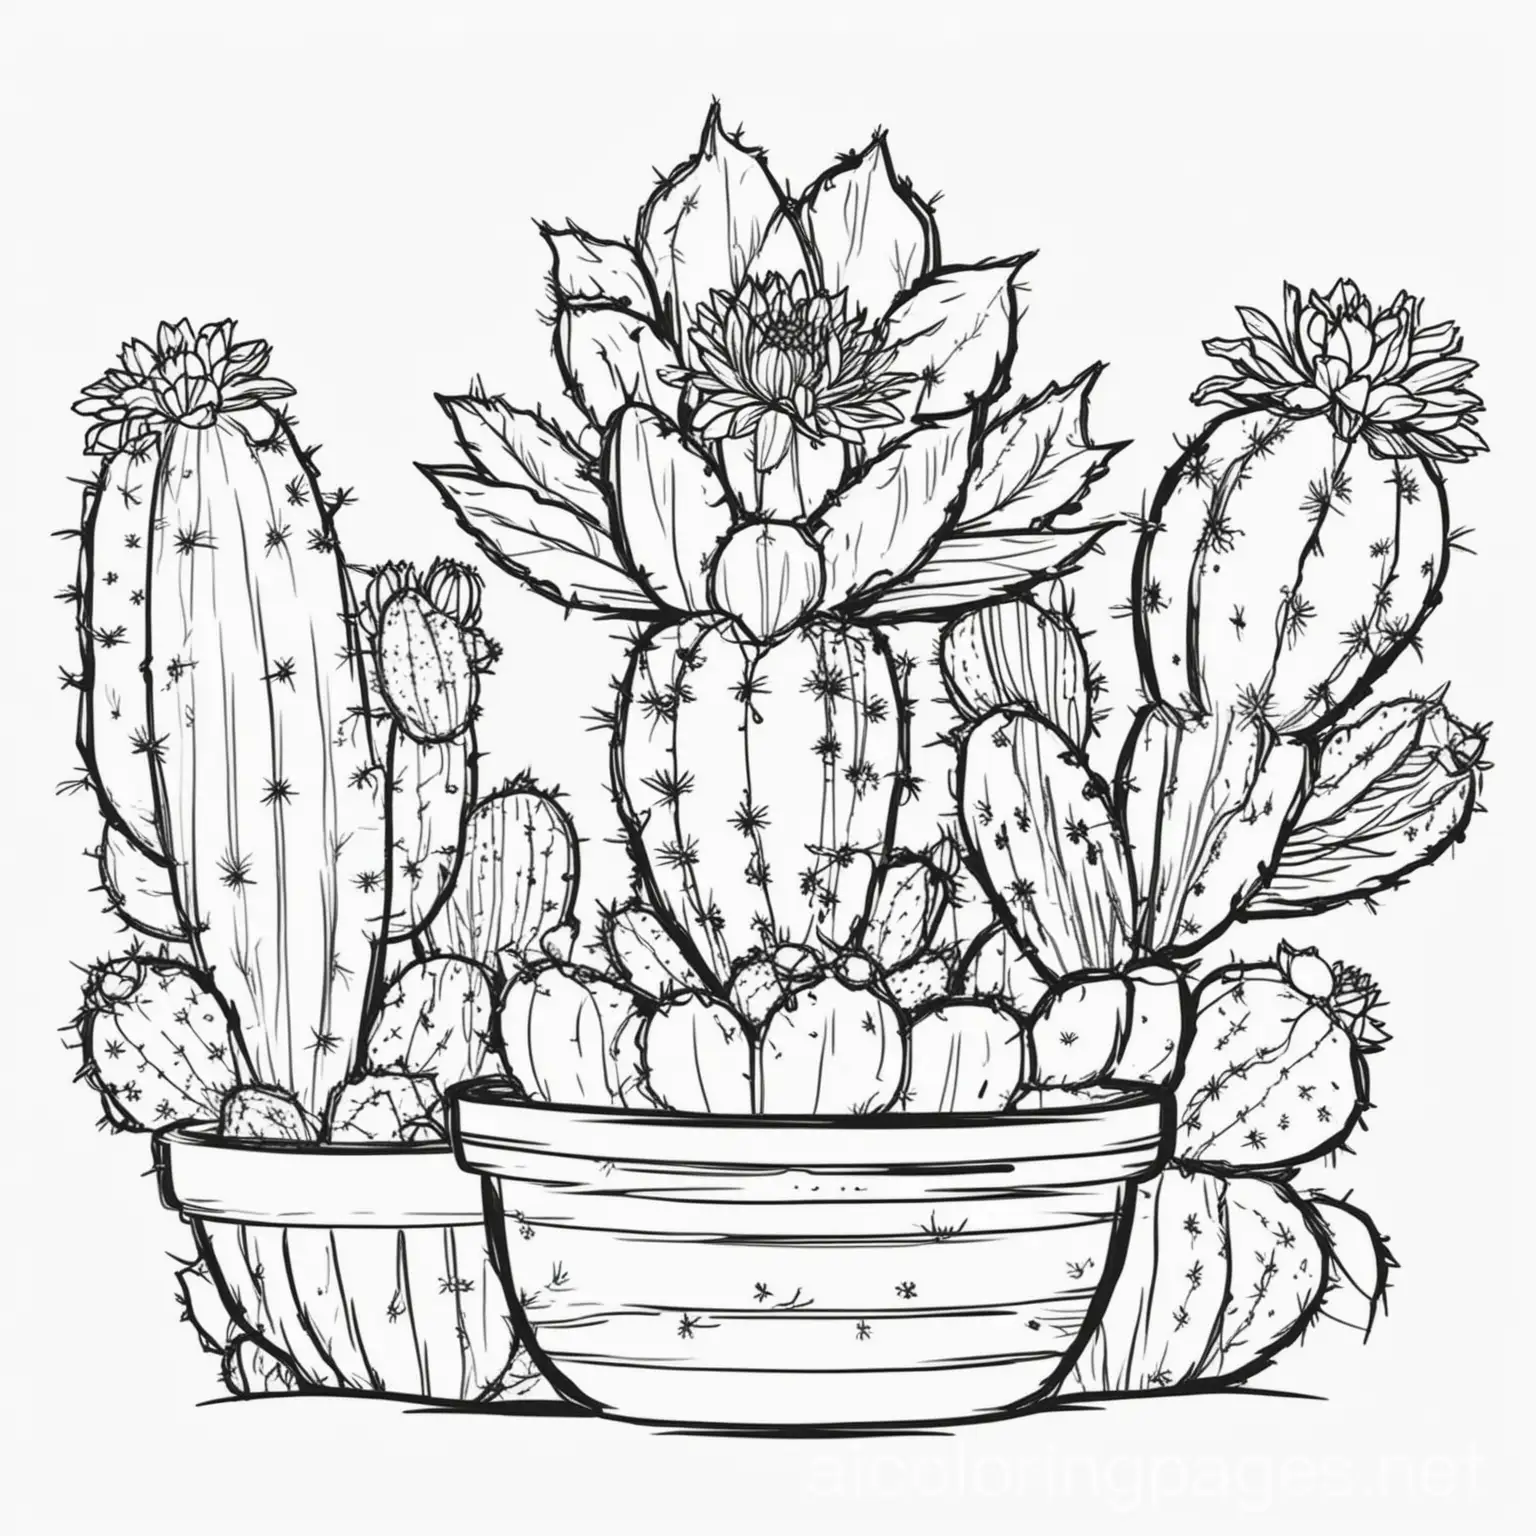 cactus and flowers, coloring pages, thick lines,, Coloring Page, black and white, line art, white background, Simplicity, Ample White Space. The background of the coloring page is plain white to make it easy for young children to color within the lines. The outlines of all the subjects are easy to distinguish, making it simple for kids to color without too much difficulty